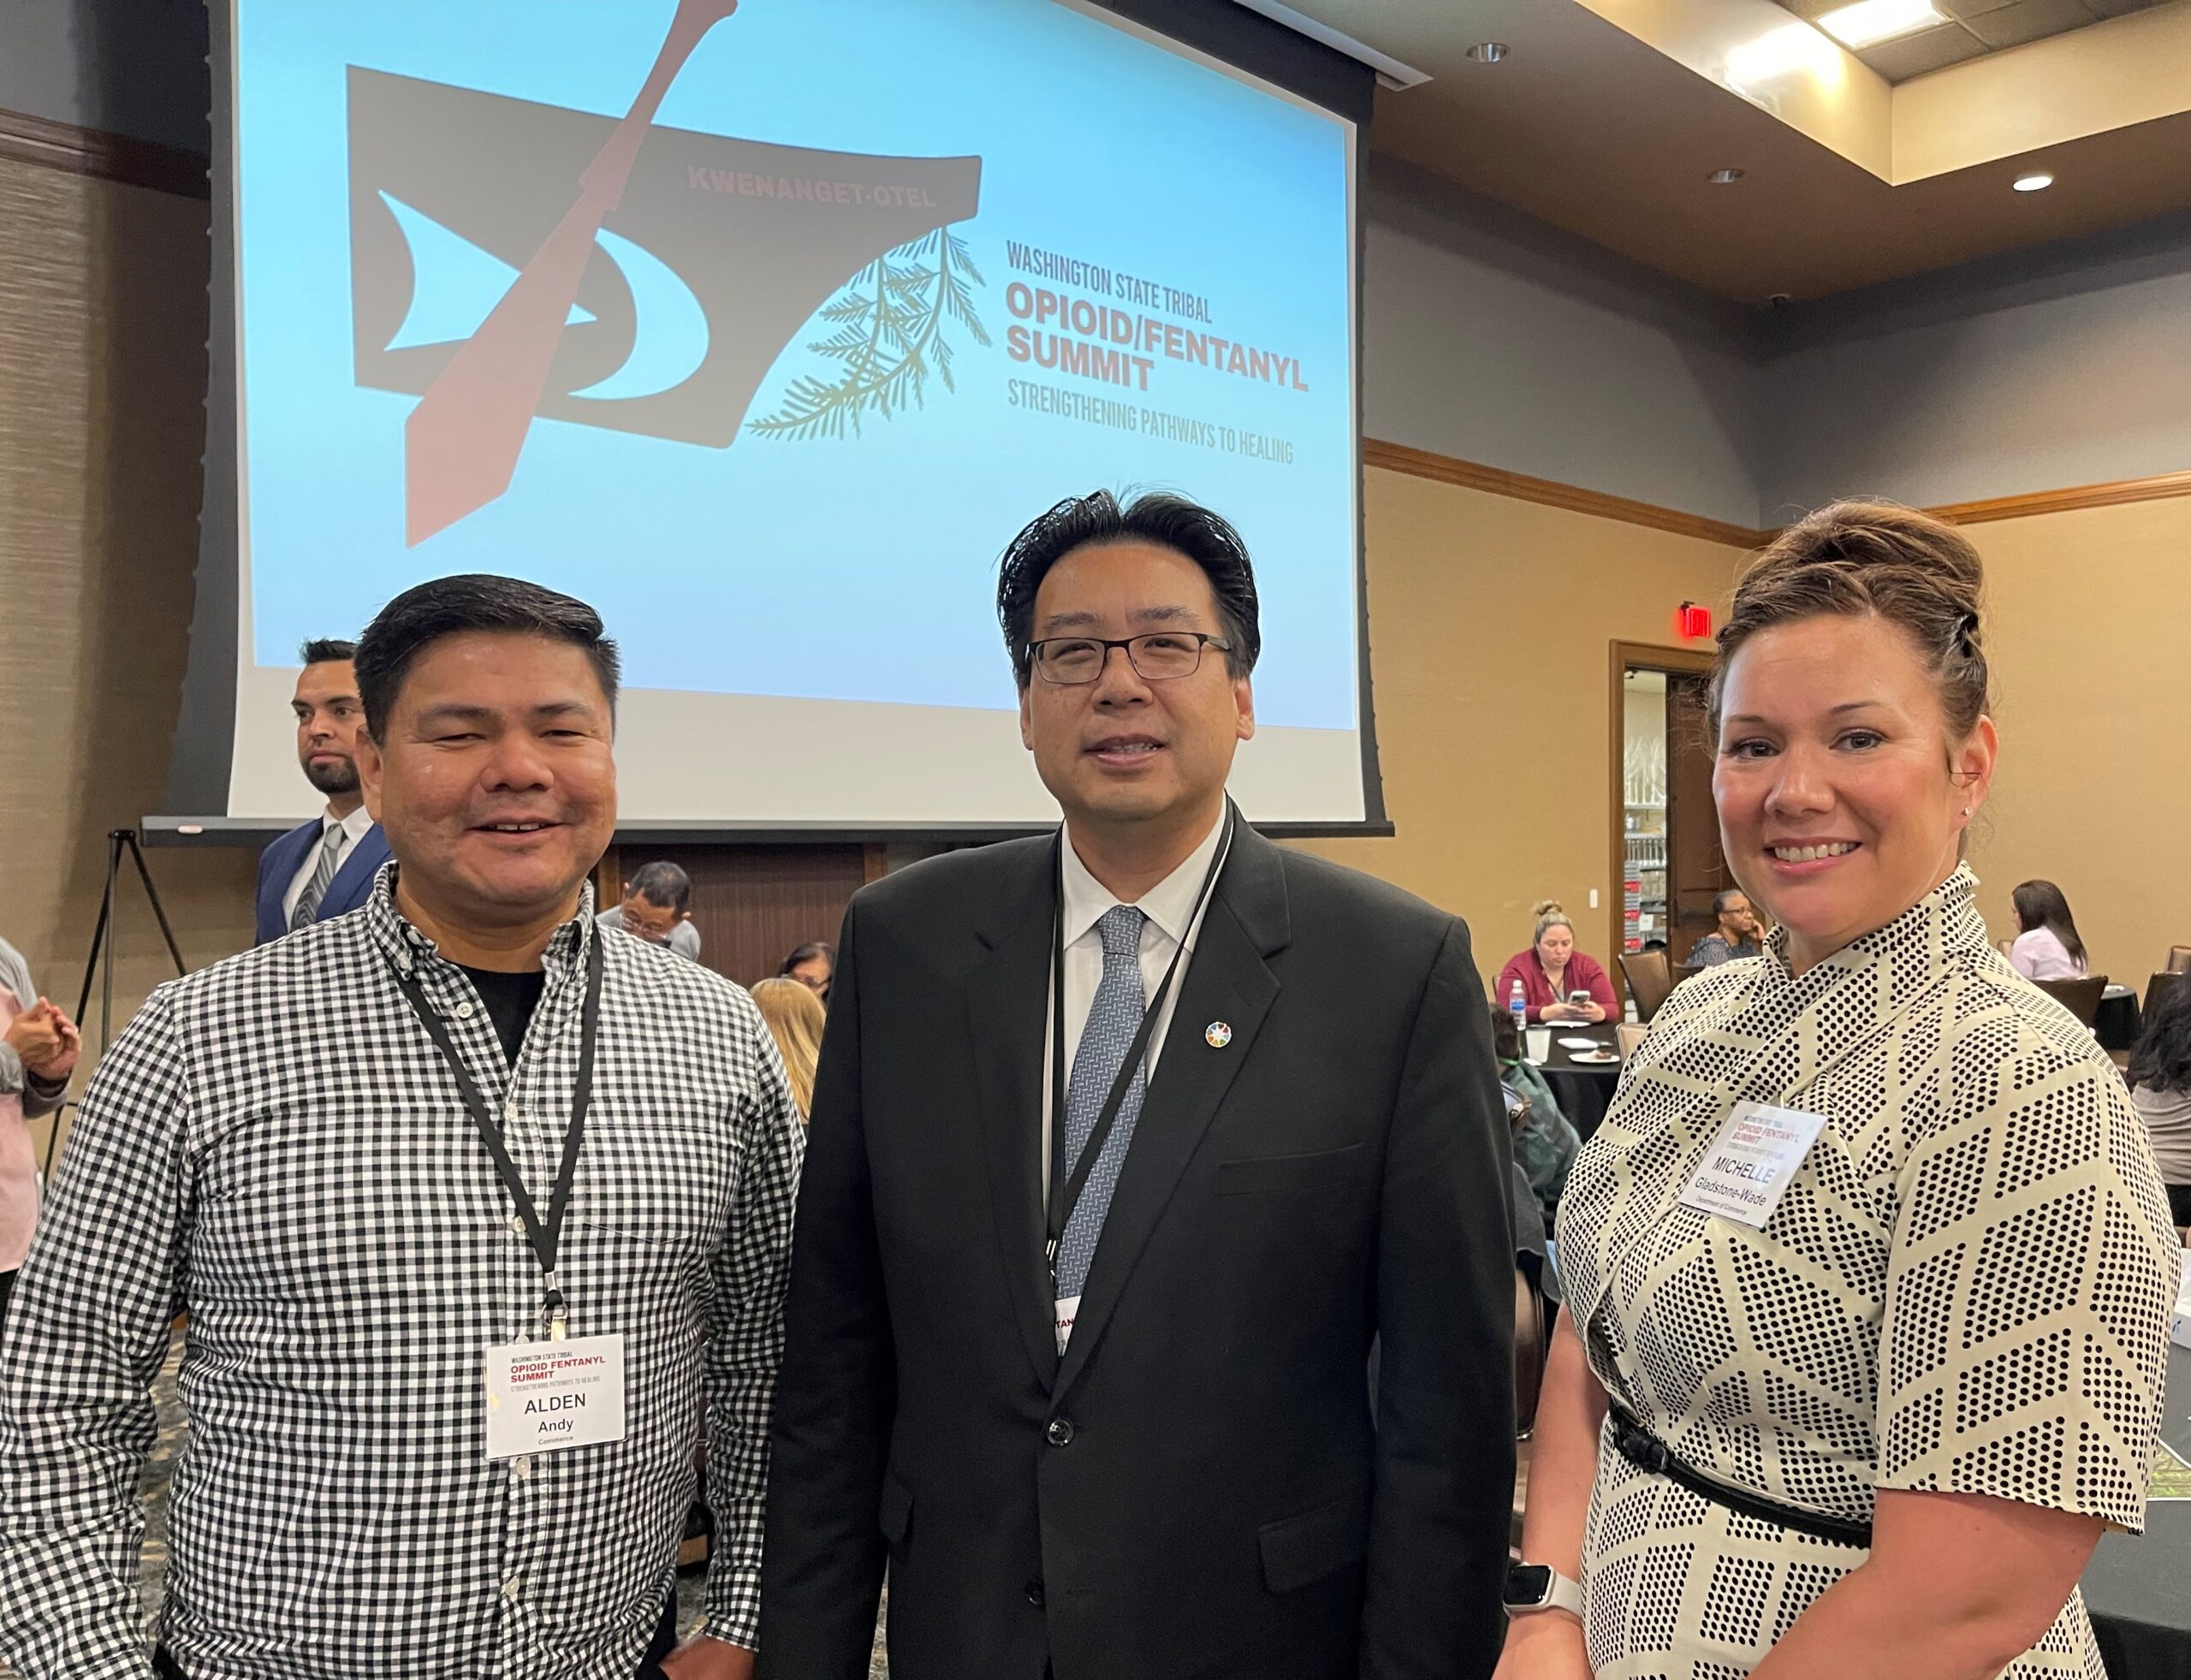 Director Fong establishes the Office of Tribal Relations as a